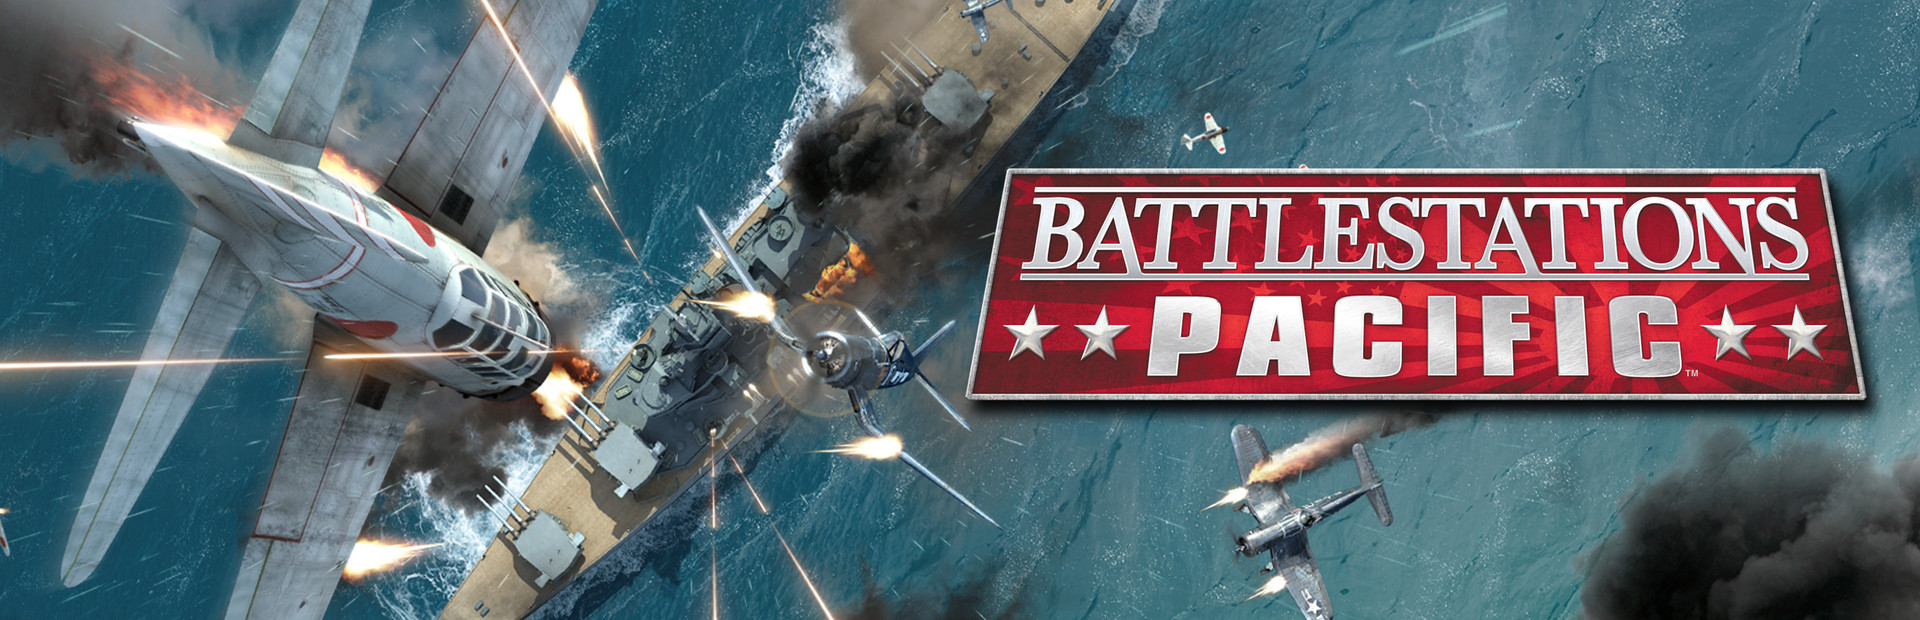 Battlestations Pacific cover image